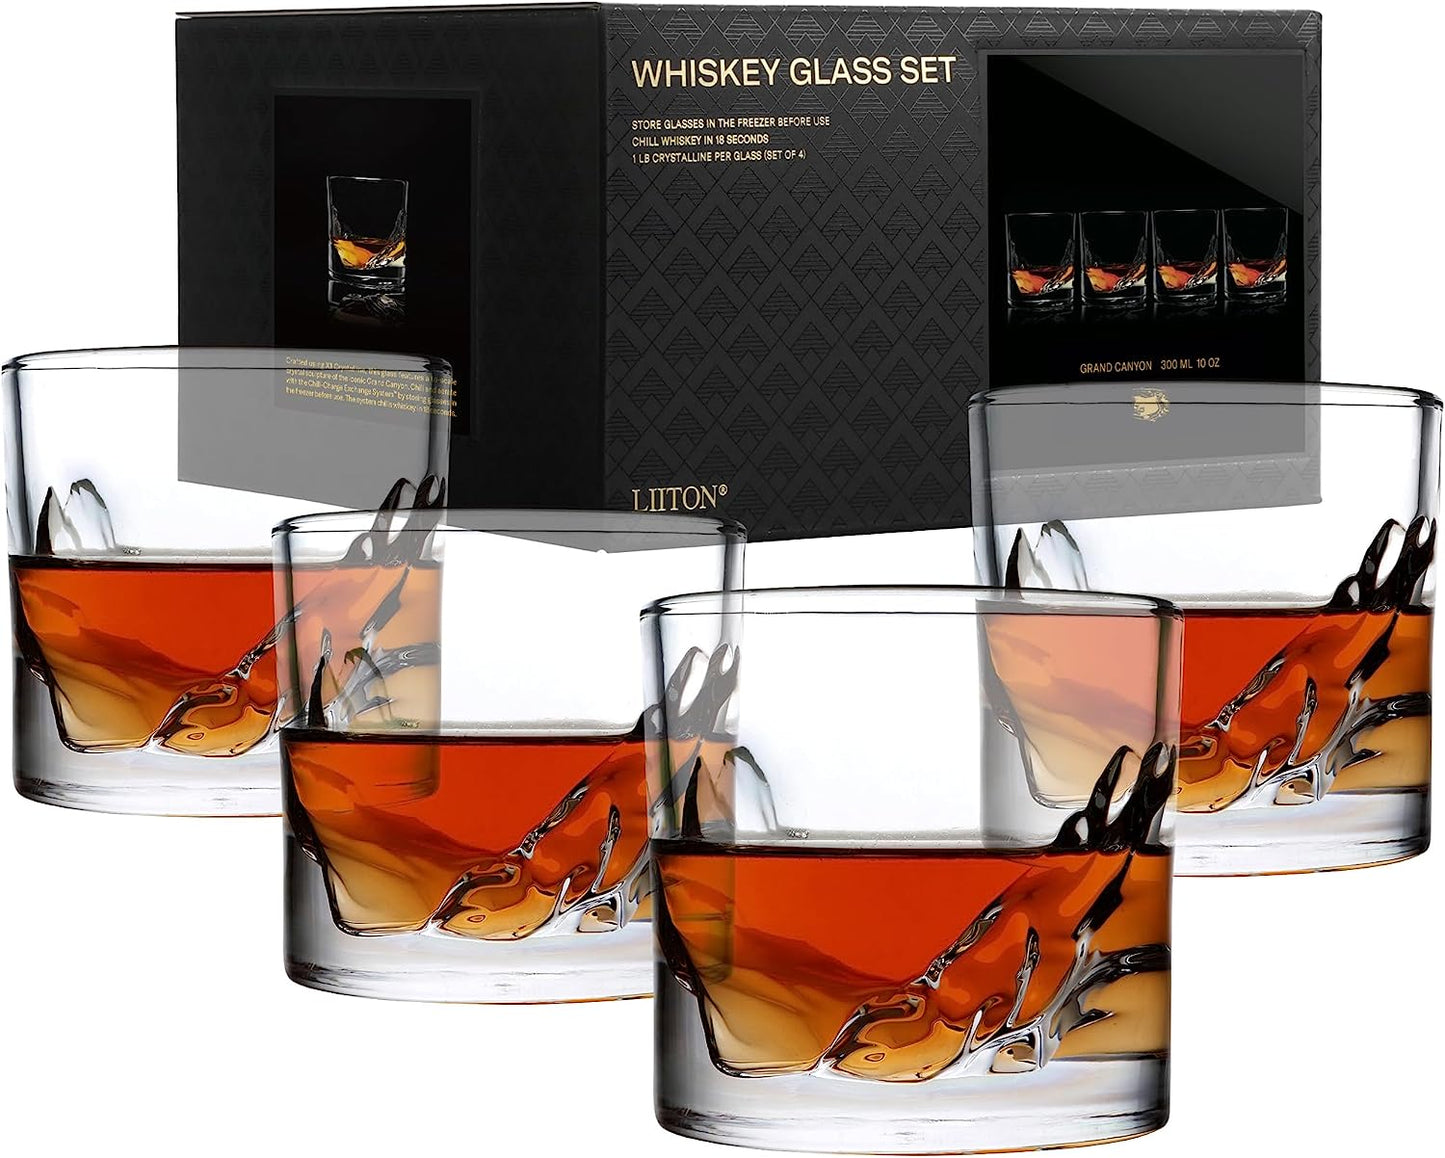 LIITON Grand Canyon Whiskey Glasses- Set of 4 4 Count (Pack of 1)